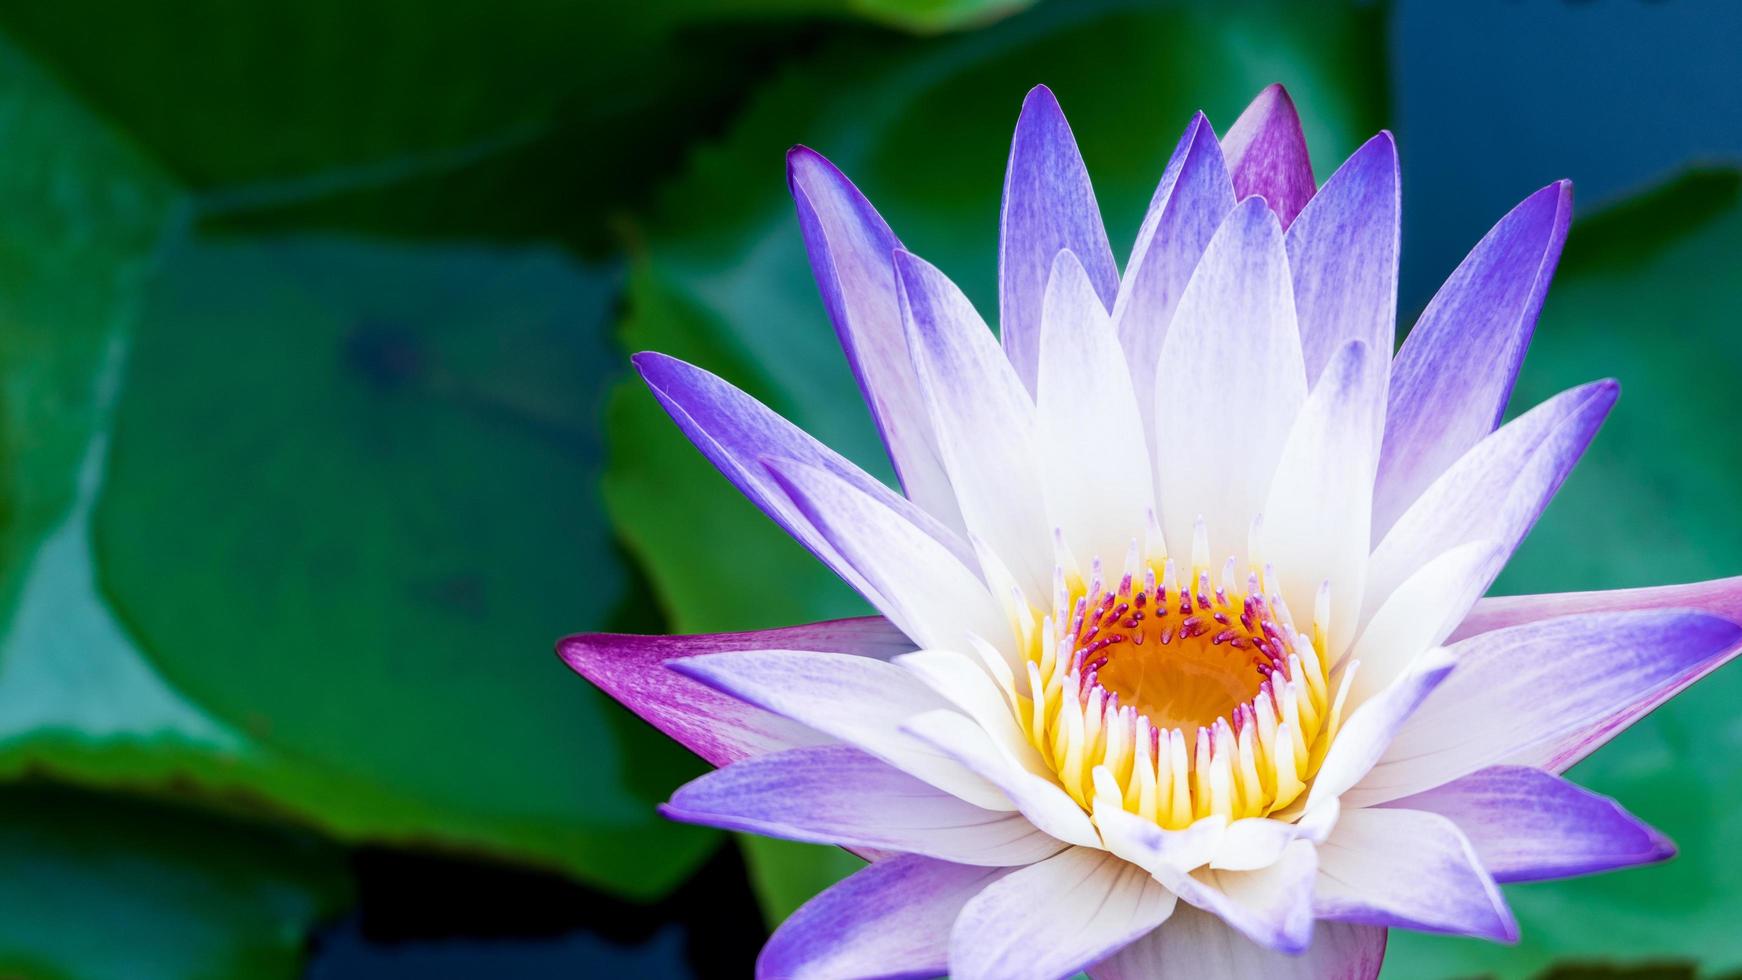 The beauty of lotus flowers blooming in white and purple on the pond.water lily, peace, beauty of nature, is the flower of Buddhism. photo